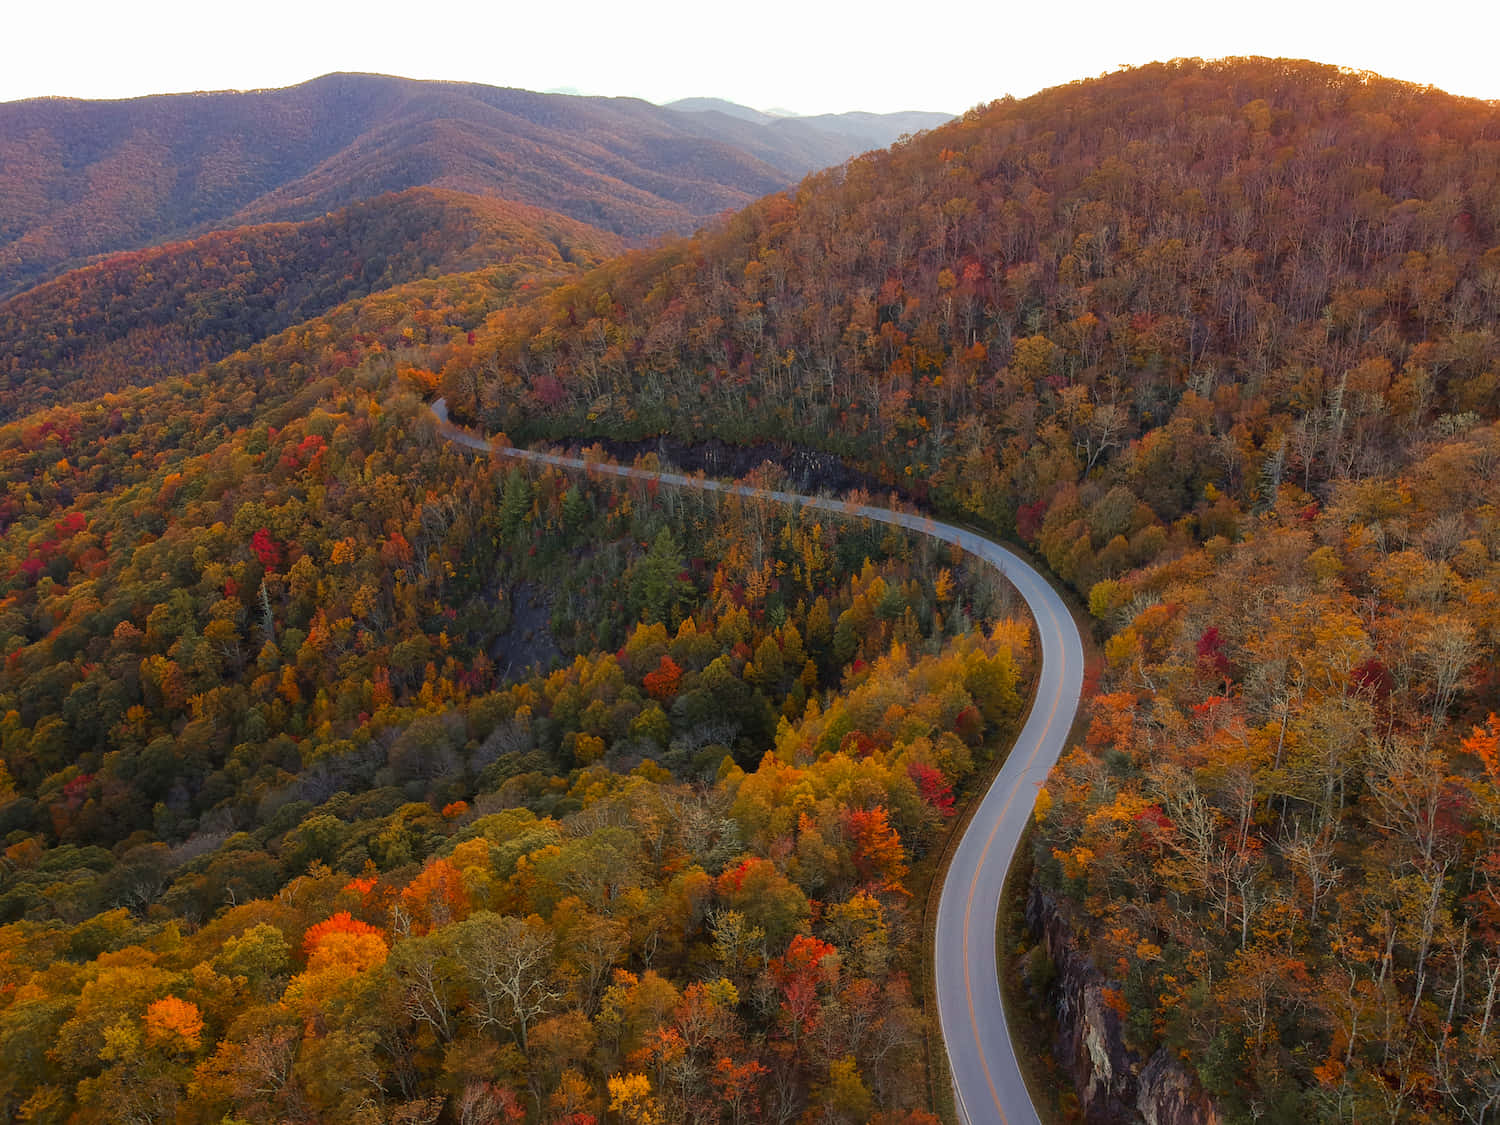 A Winding Road In The Mountains With Autumn Colors